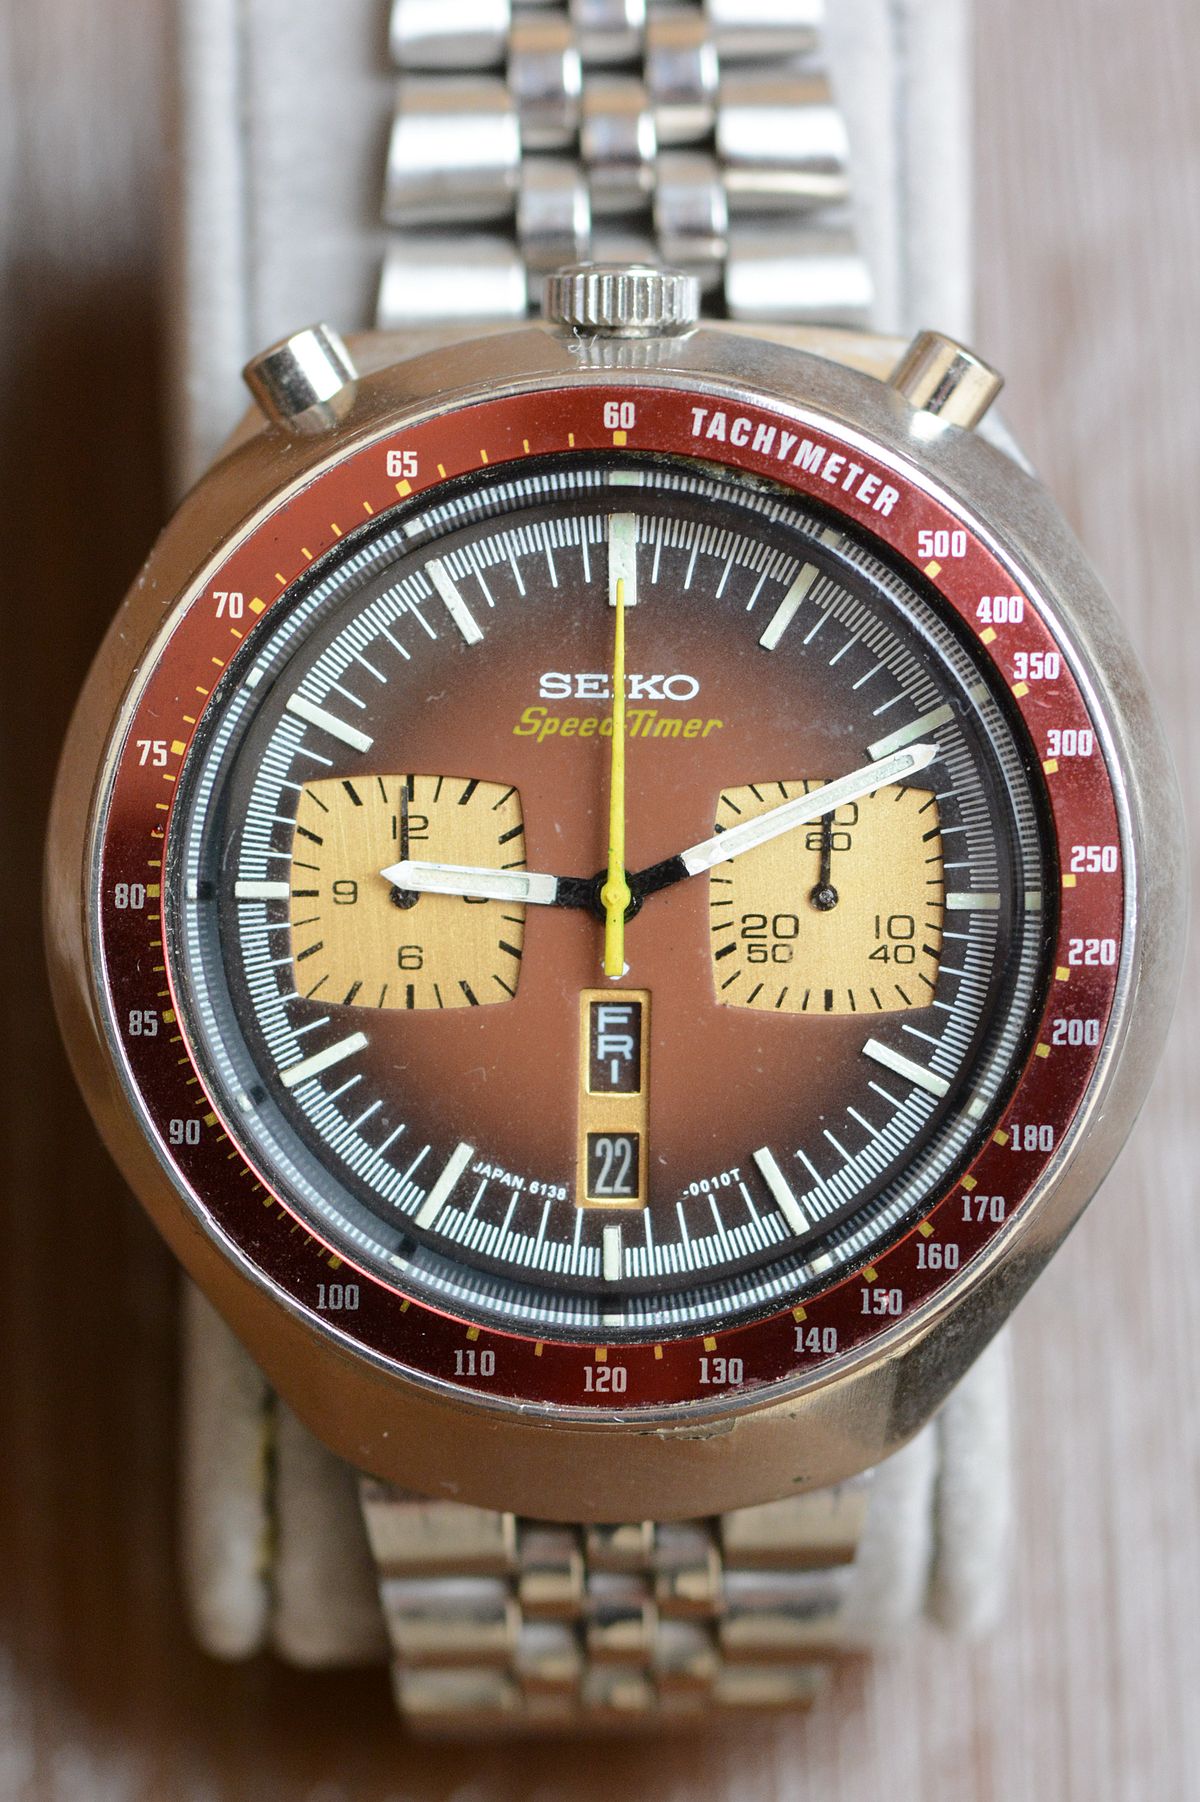 Speed-Timer Chronograph Automatic 6138-0040 1976.jpg - Commons